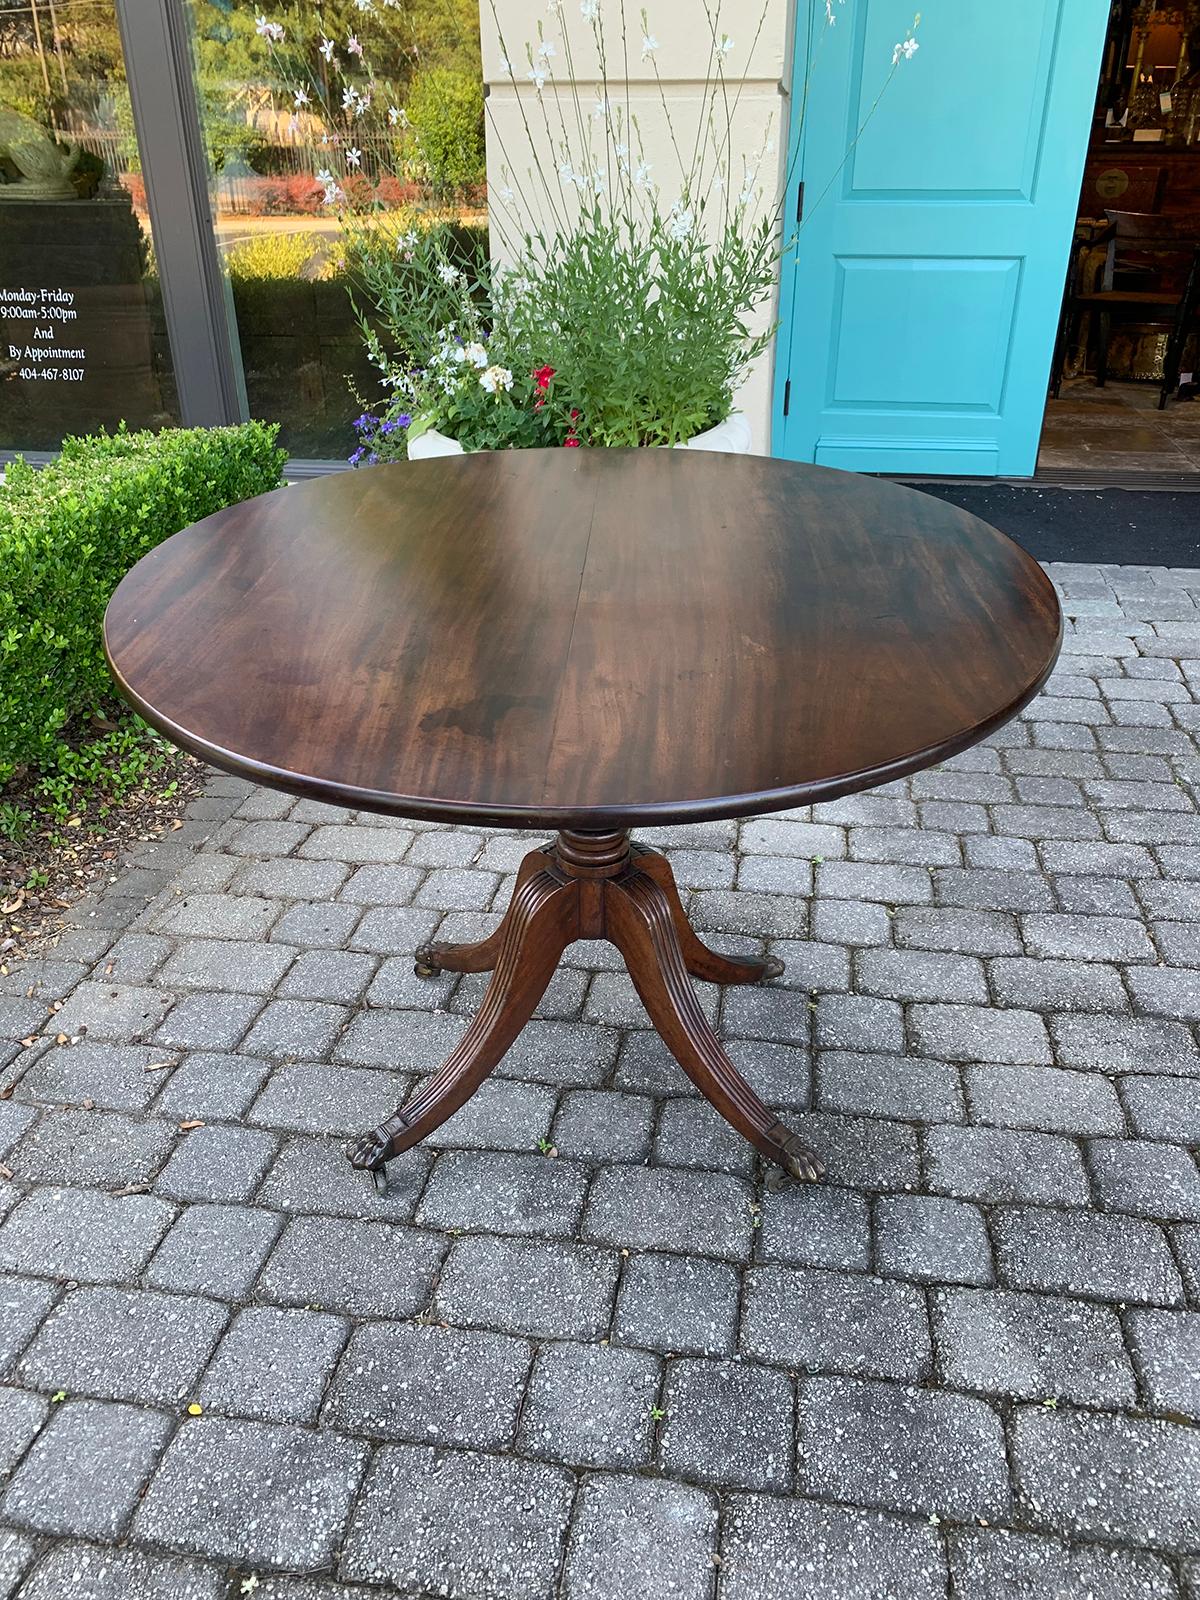 Early 19th Century Regency Style Round Mahogany Tilt-Top Pedestal Table 10